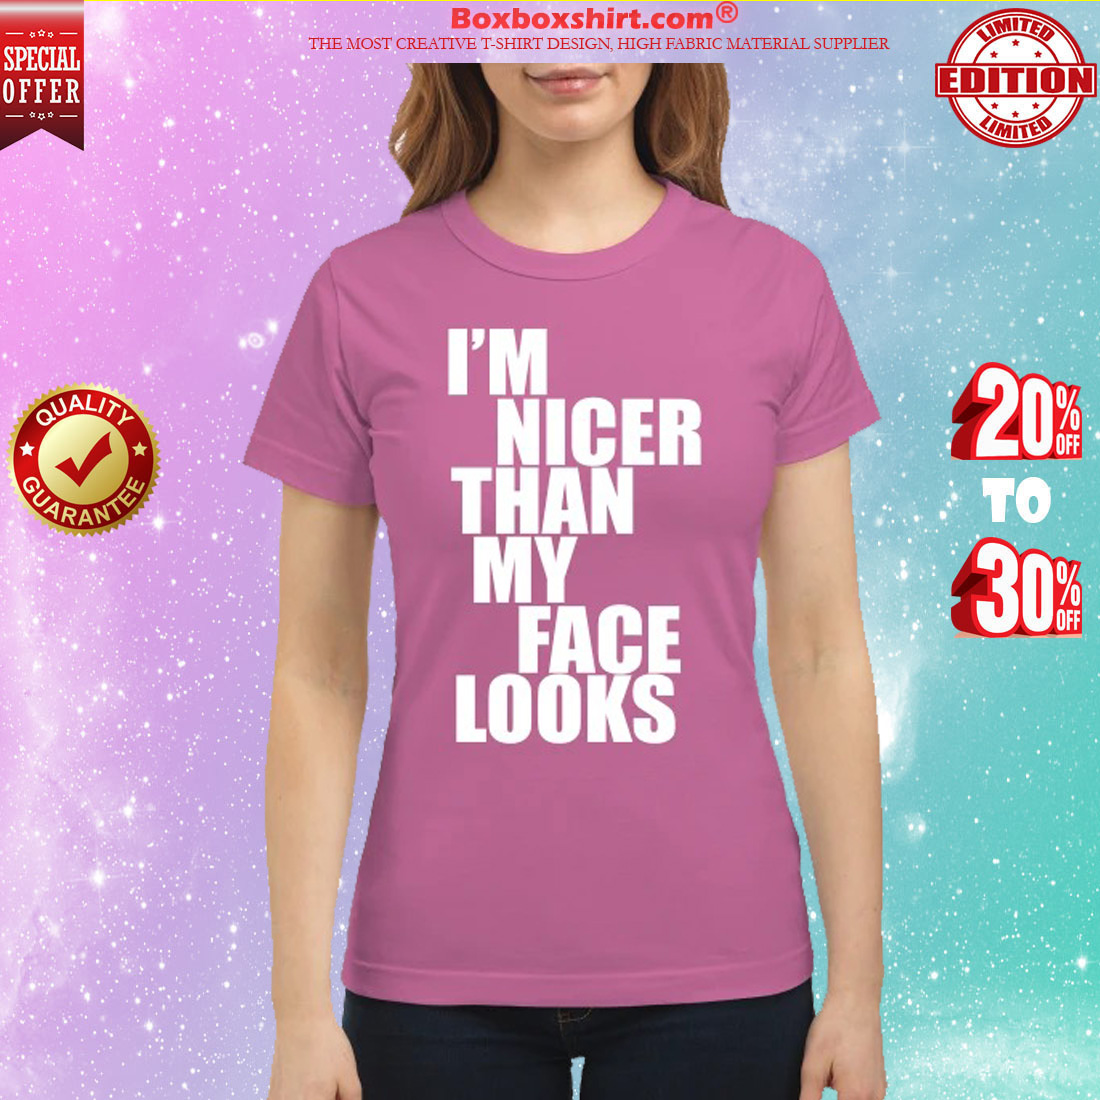 I'm nicer than my face look classic shirt